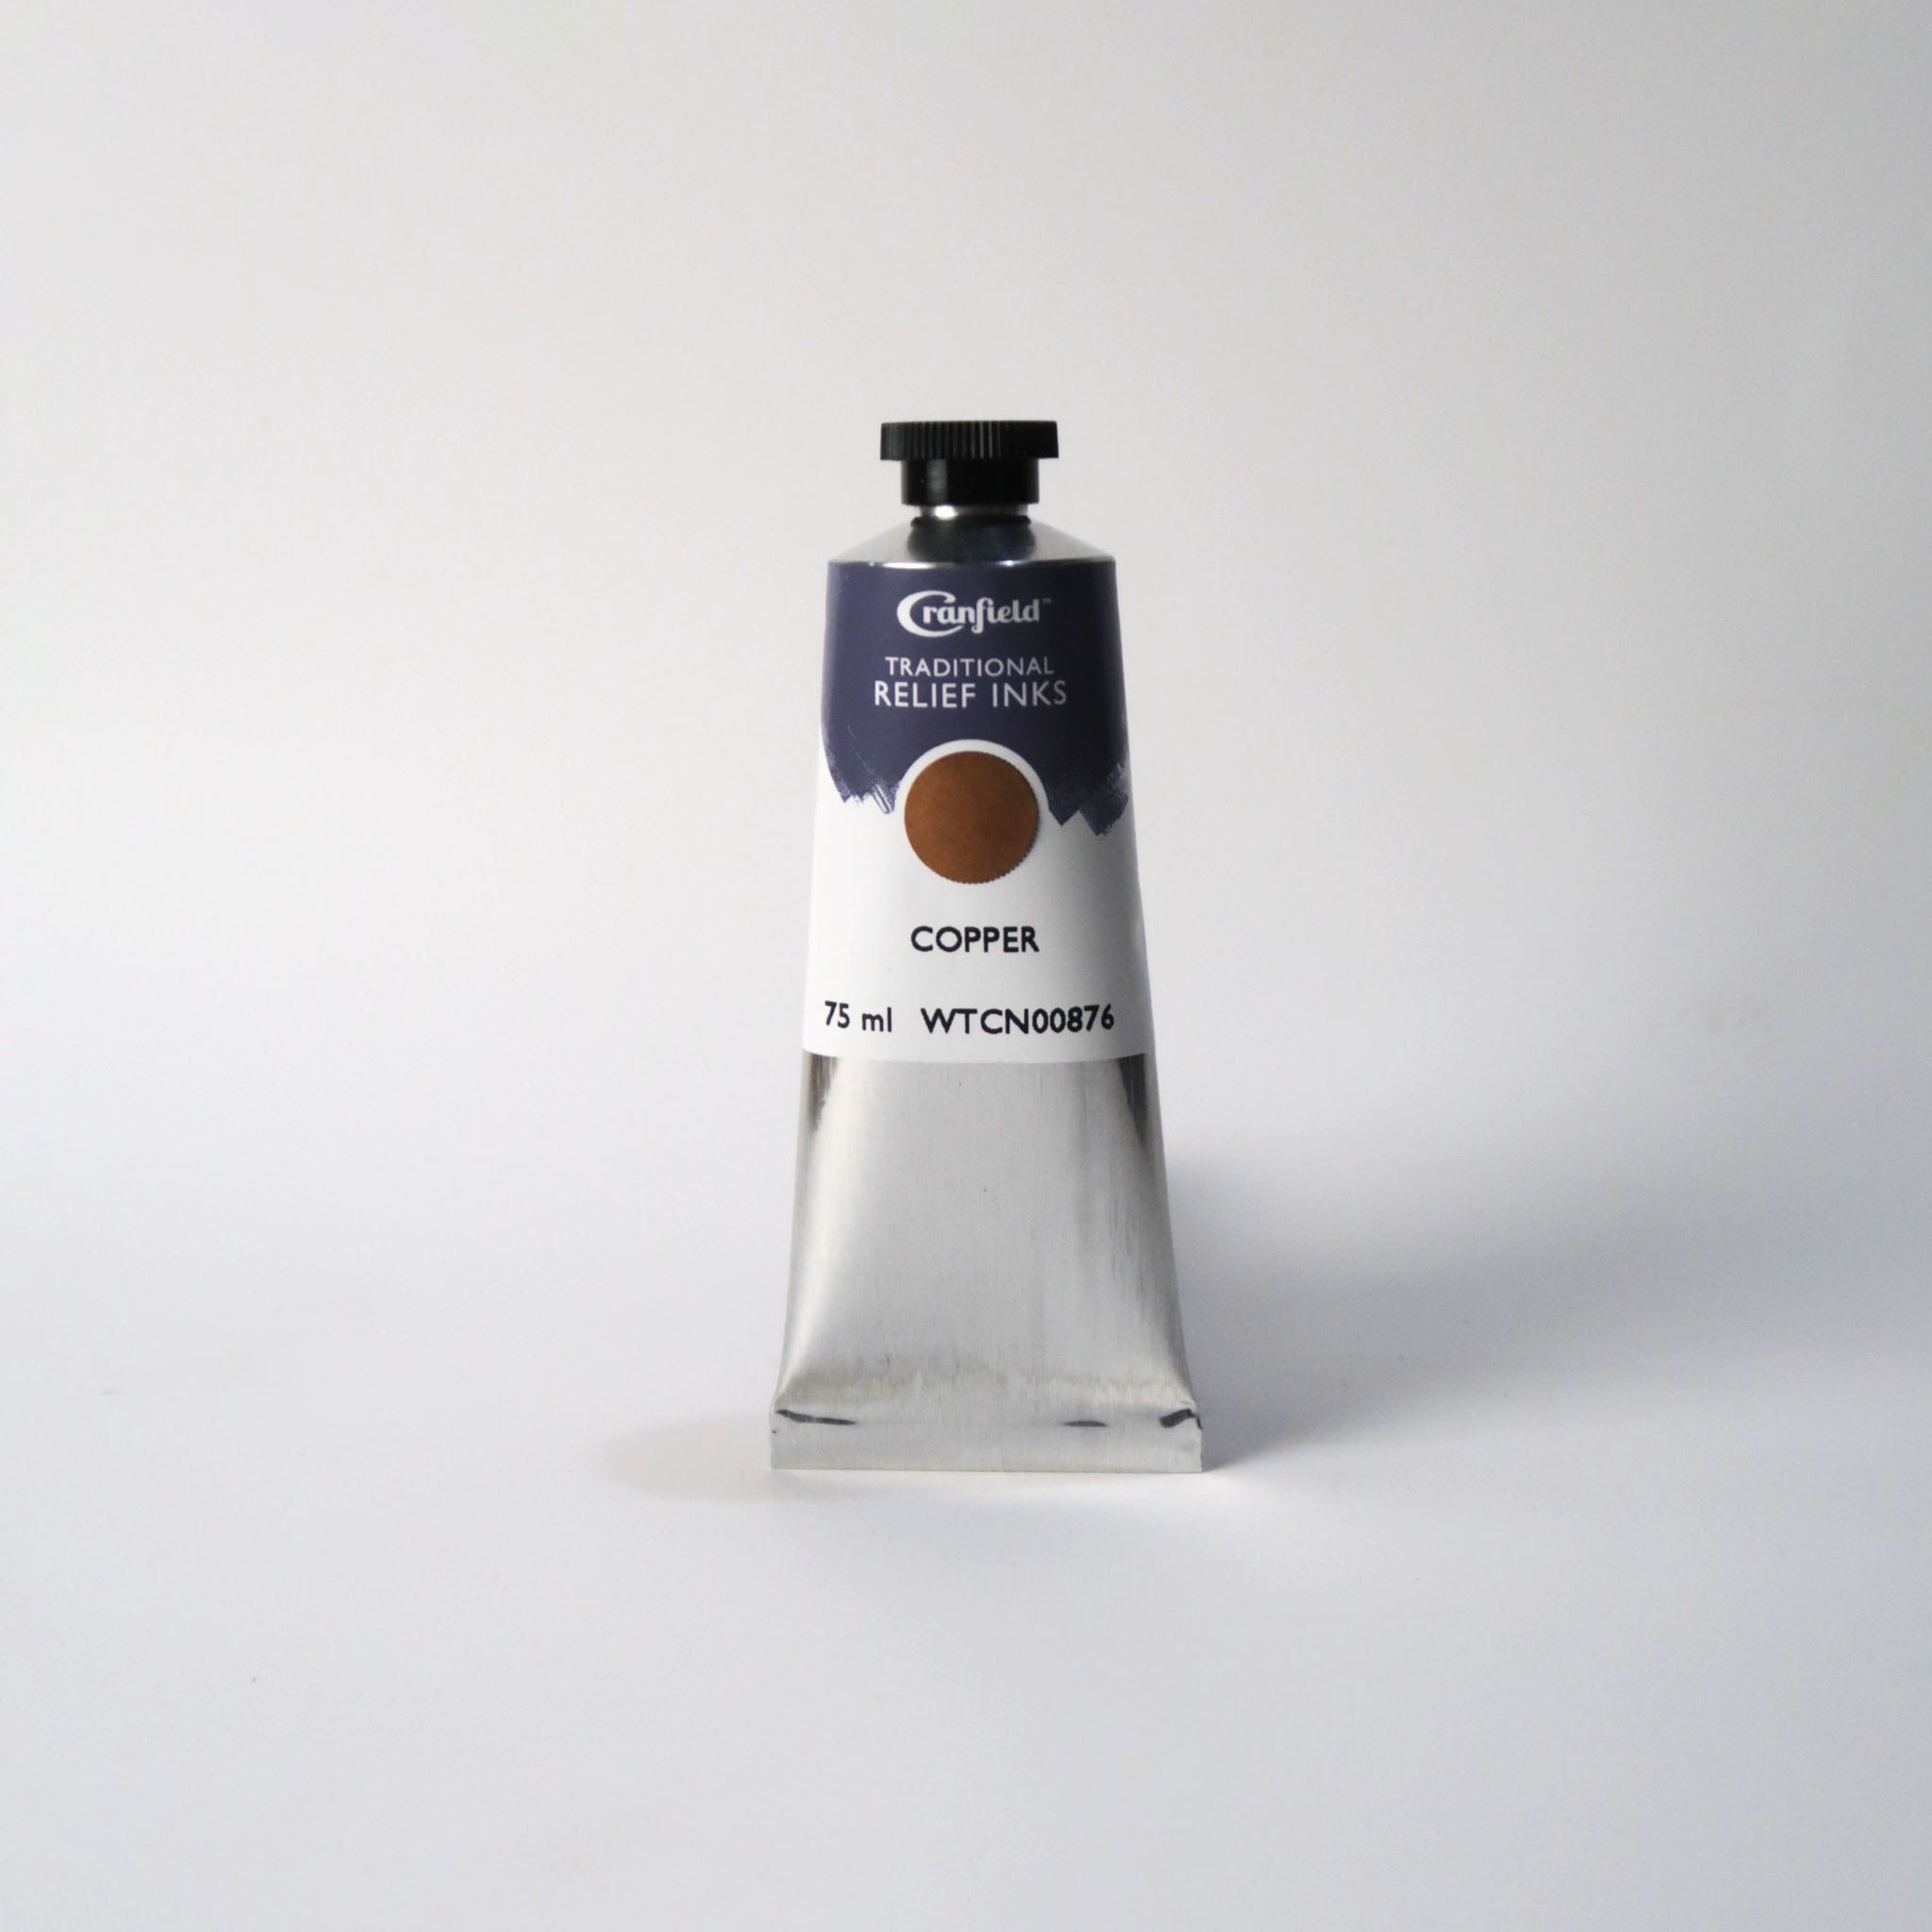 Cranfield Traditional Relief Ink - 75ml